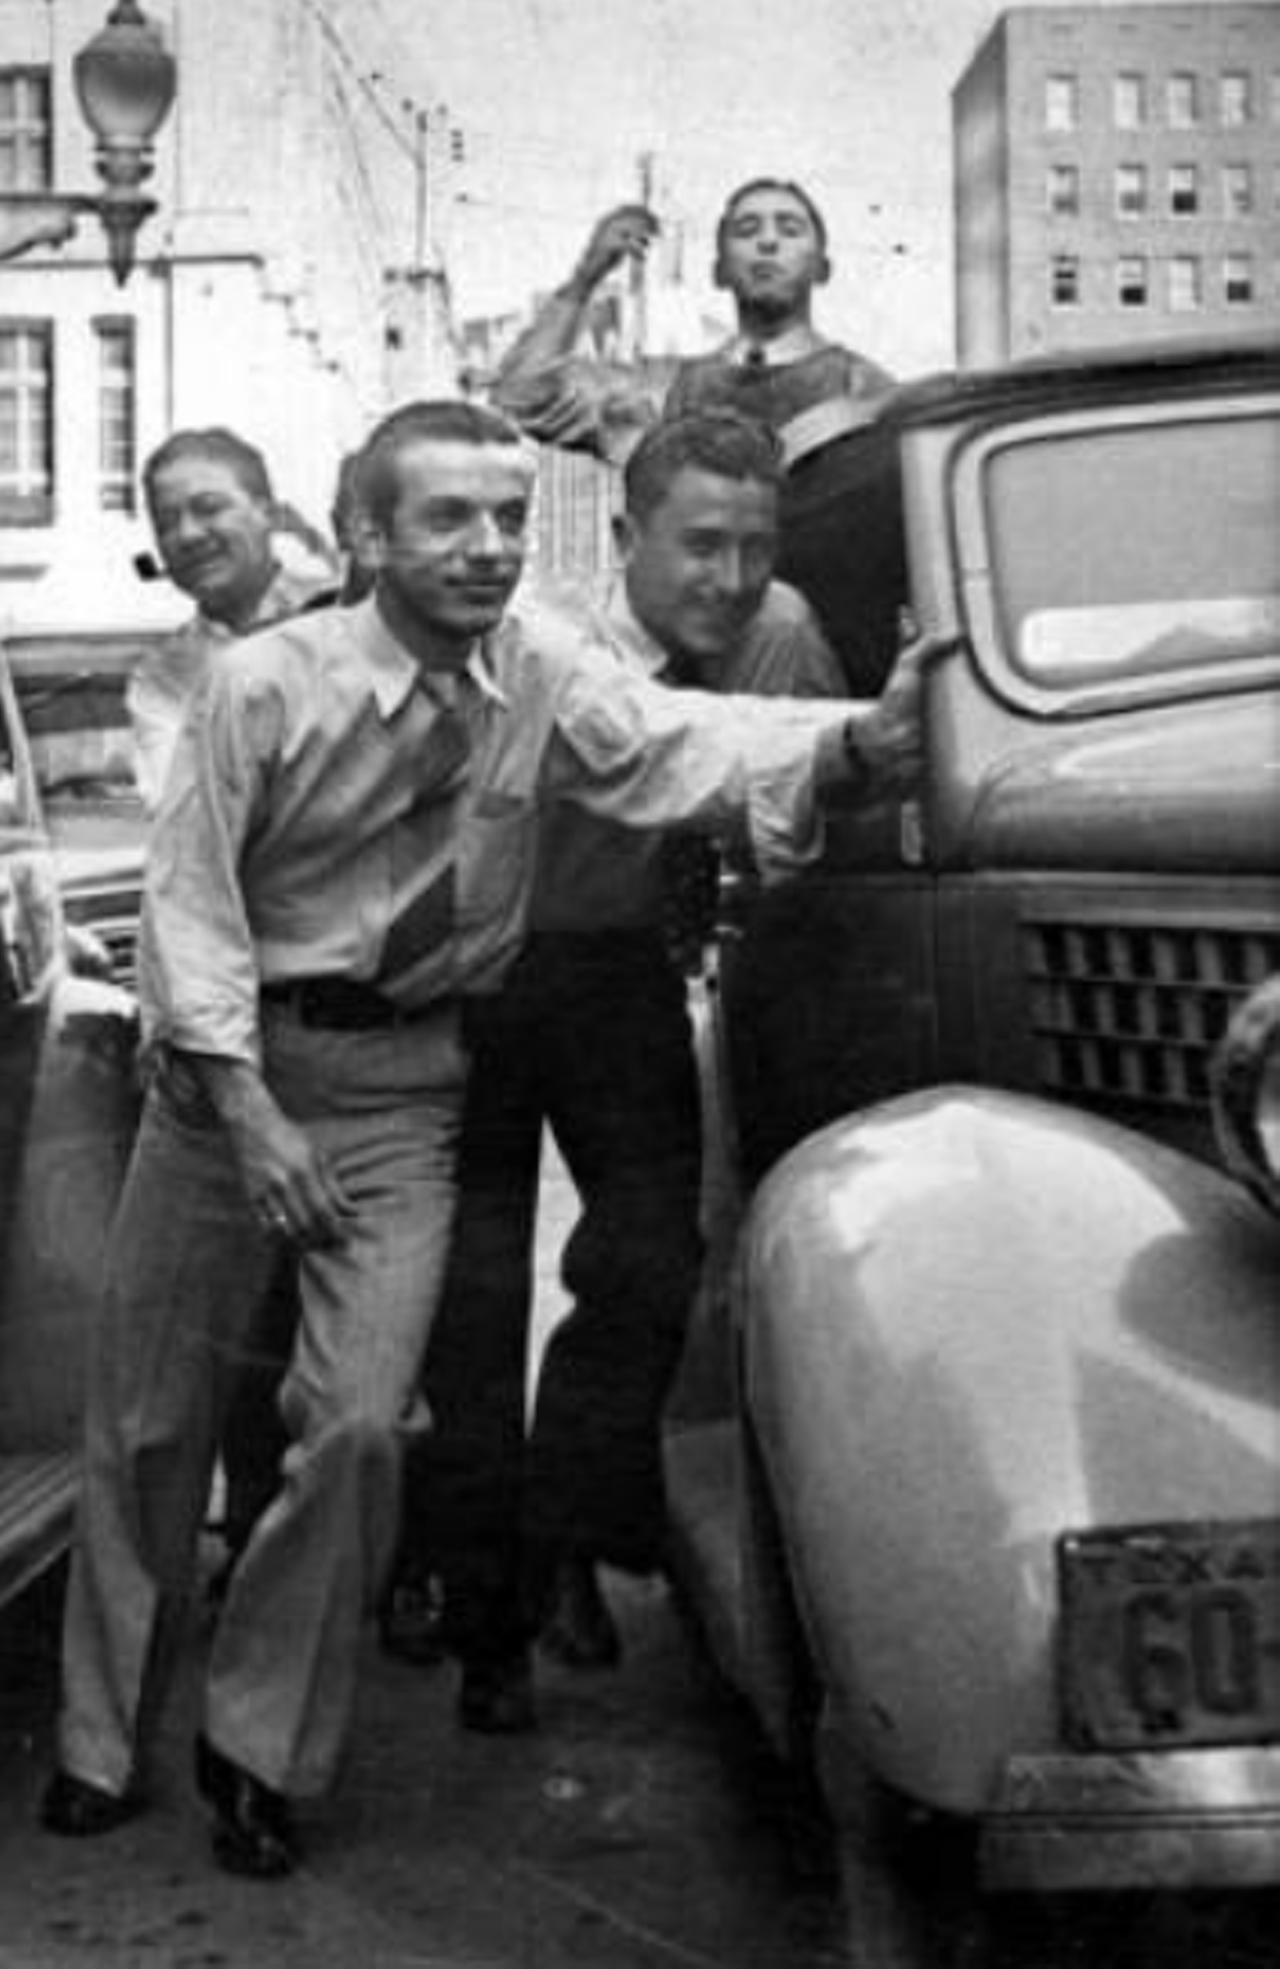 After finishing class at Draughn's Business College, Oscar A. Elizondo (front) and friends pretended to push a car.